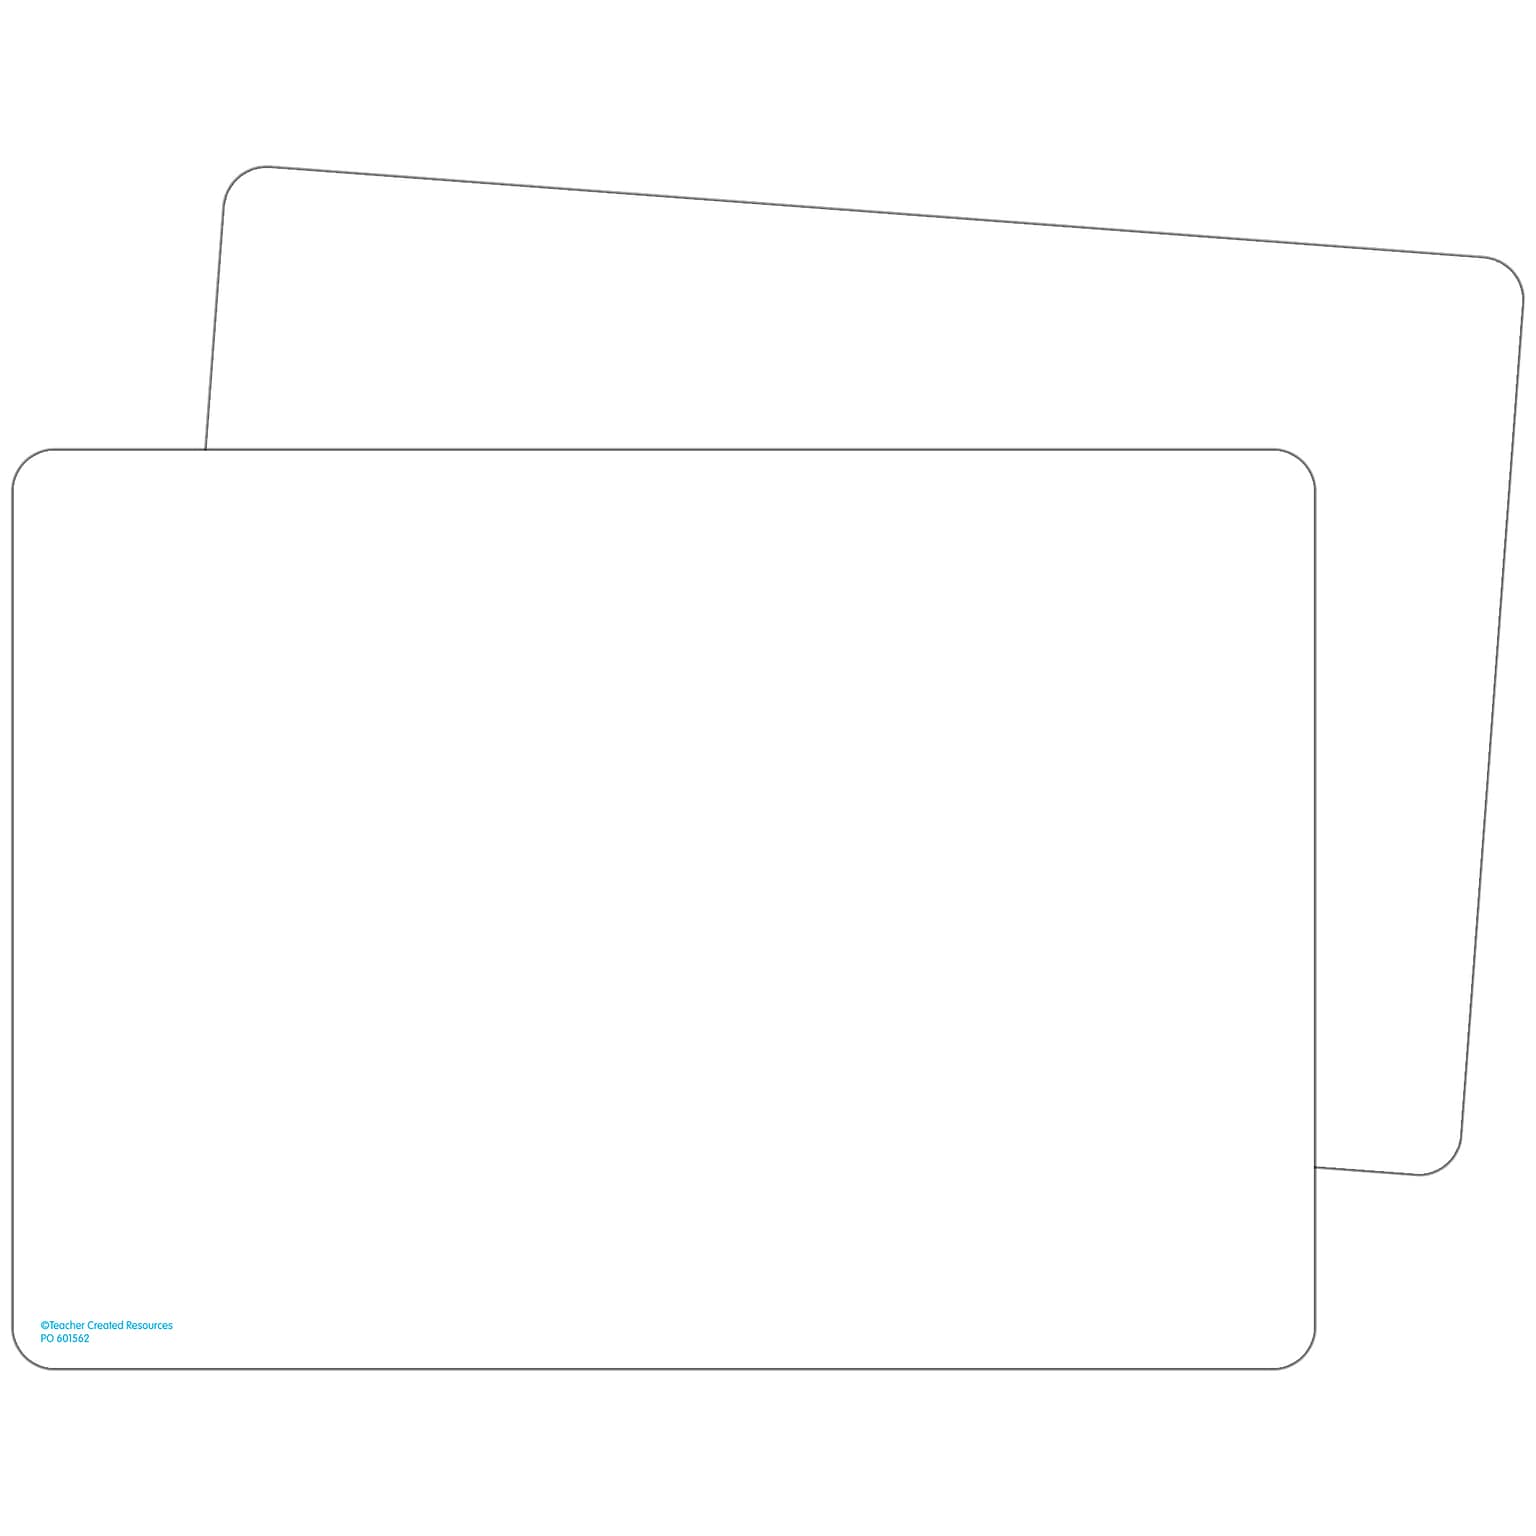 Teacher Created Resources Double-Sided Premium Blank Dry Erase Boards (TCR77891)